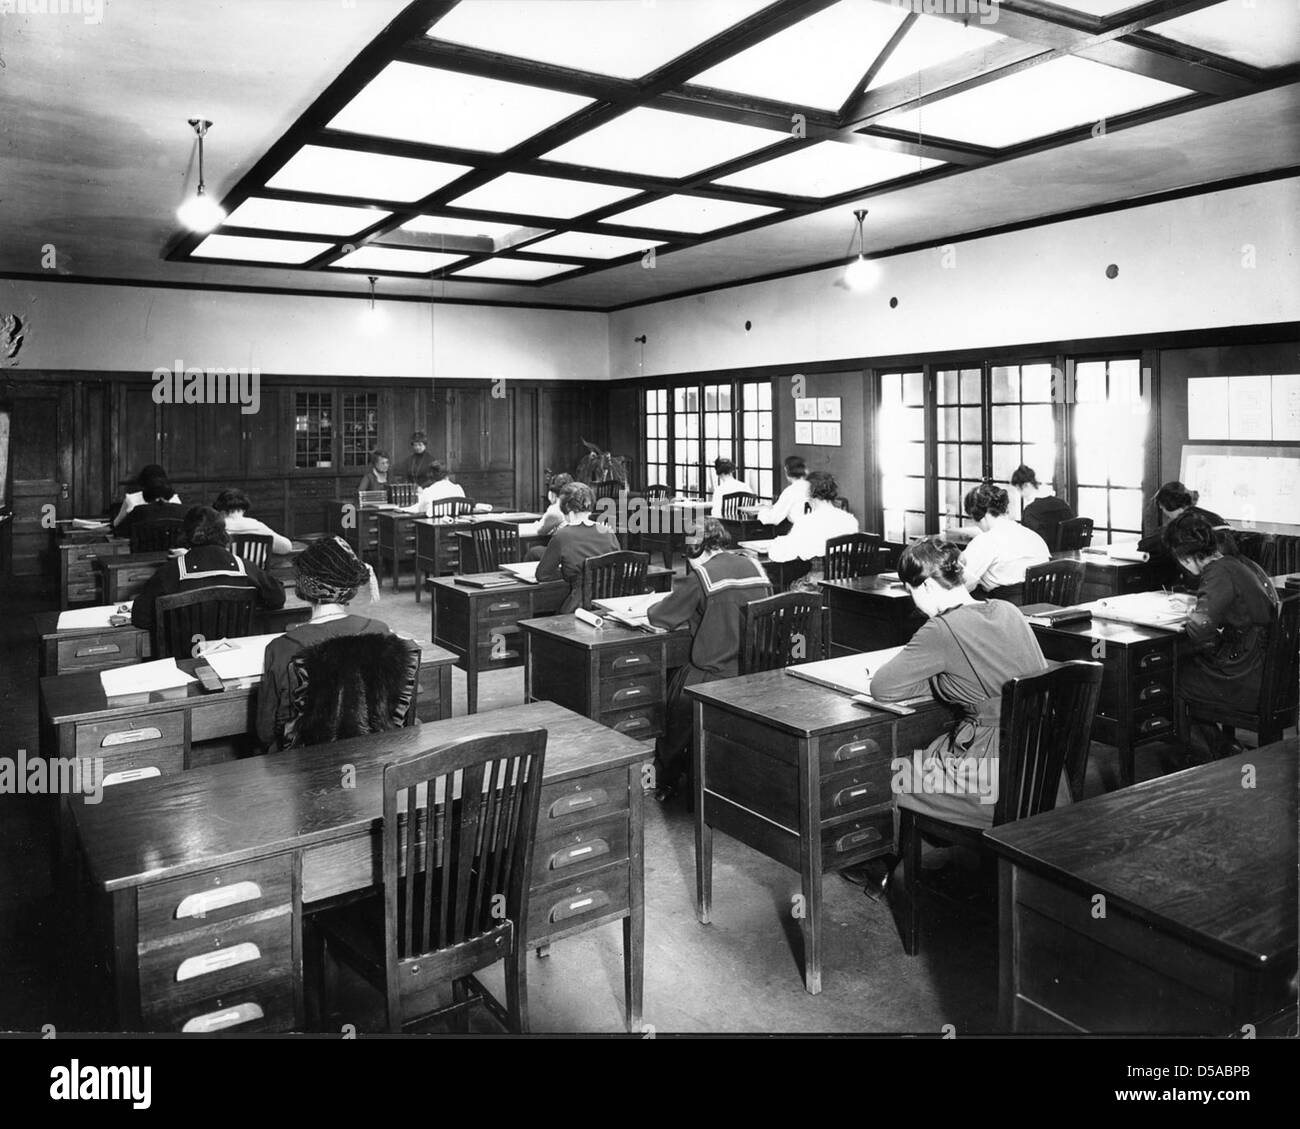 Drafting Room Black And White Stock Photos Images Alamy